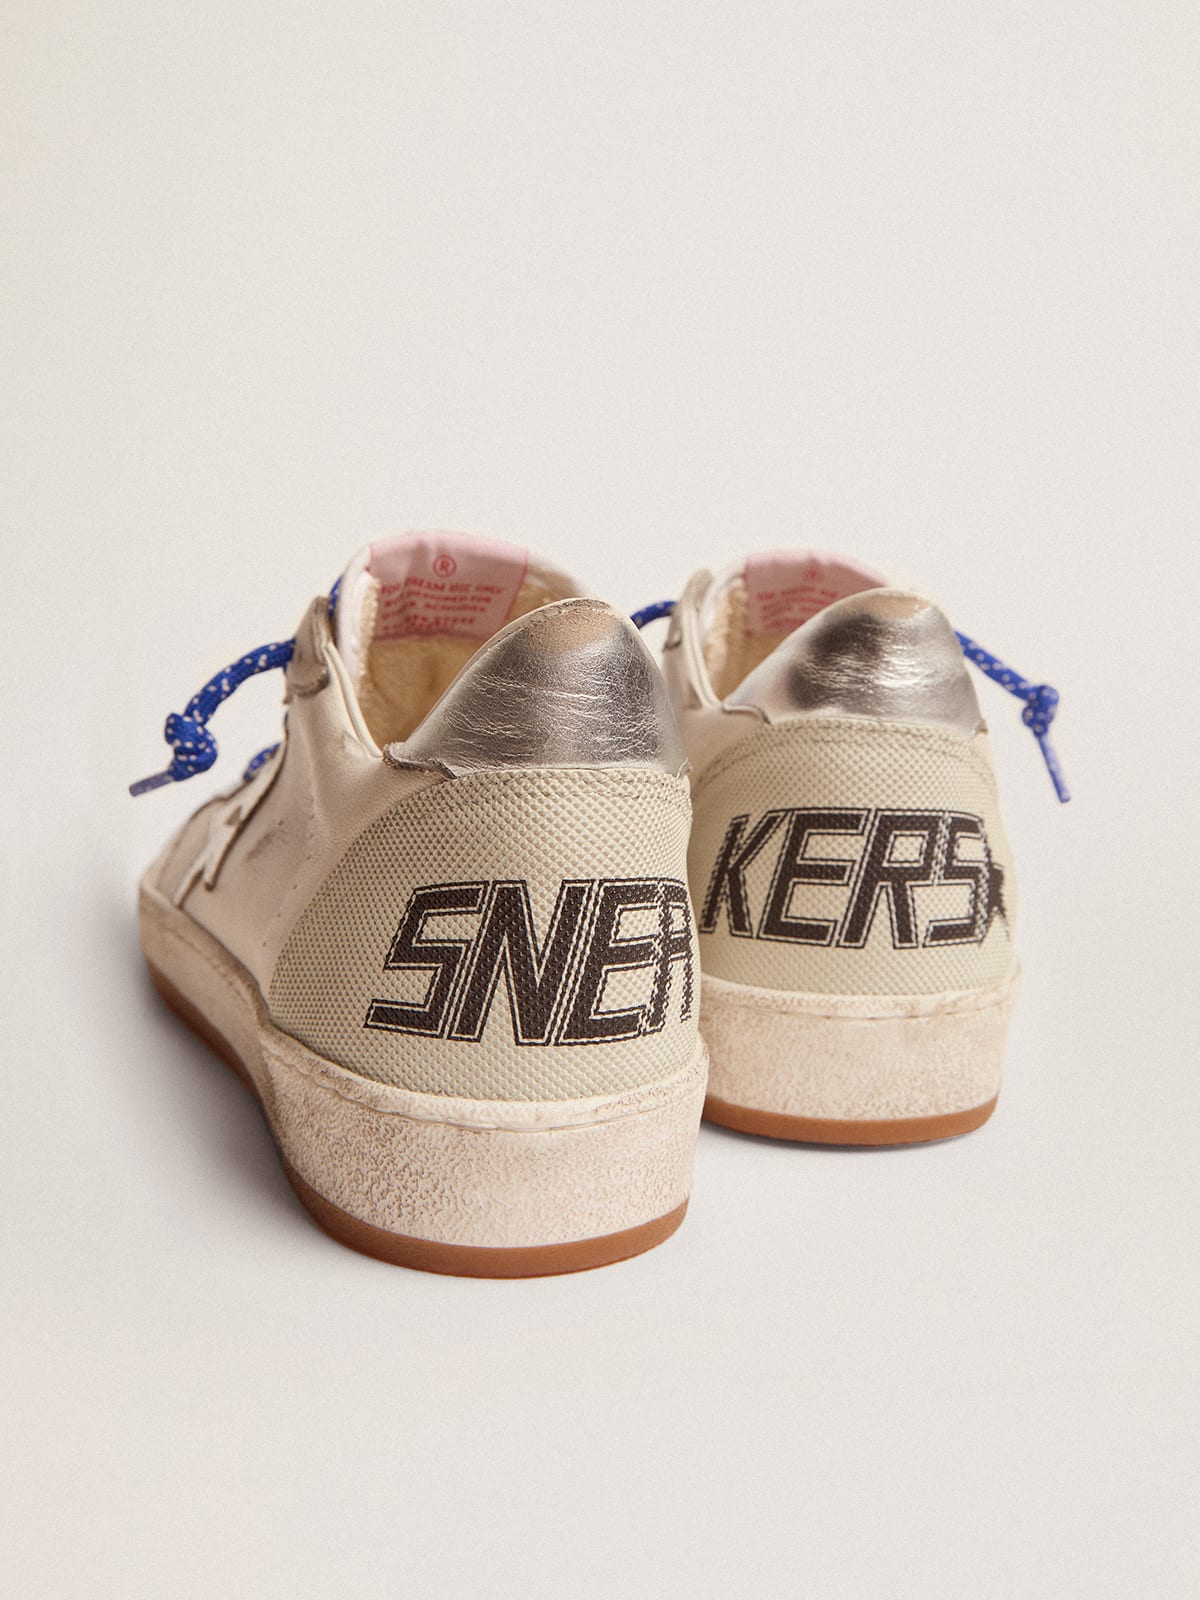 Golden Goose - Ball Star LTD sneakers in white nappa leather with silver laminated leather star and heel tab in 